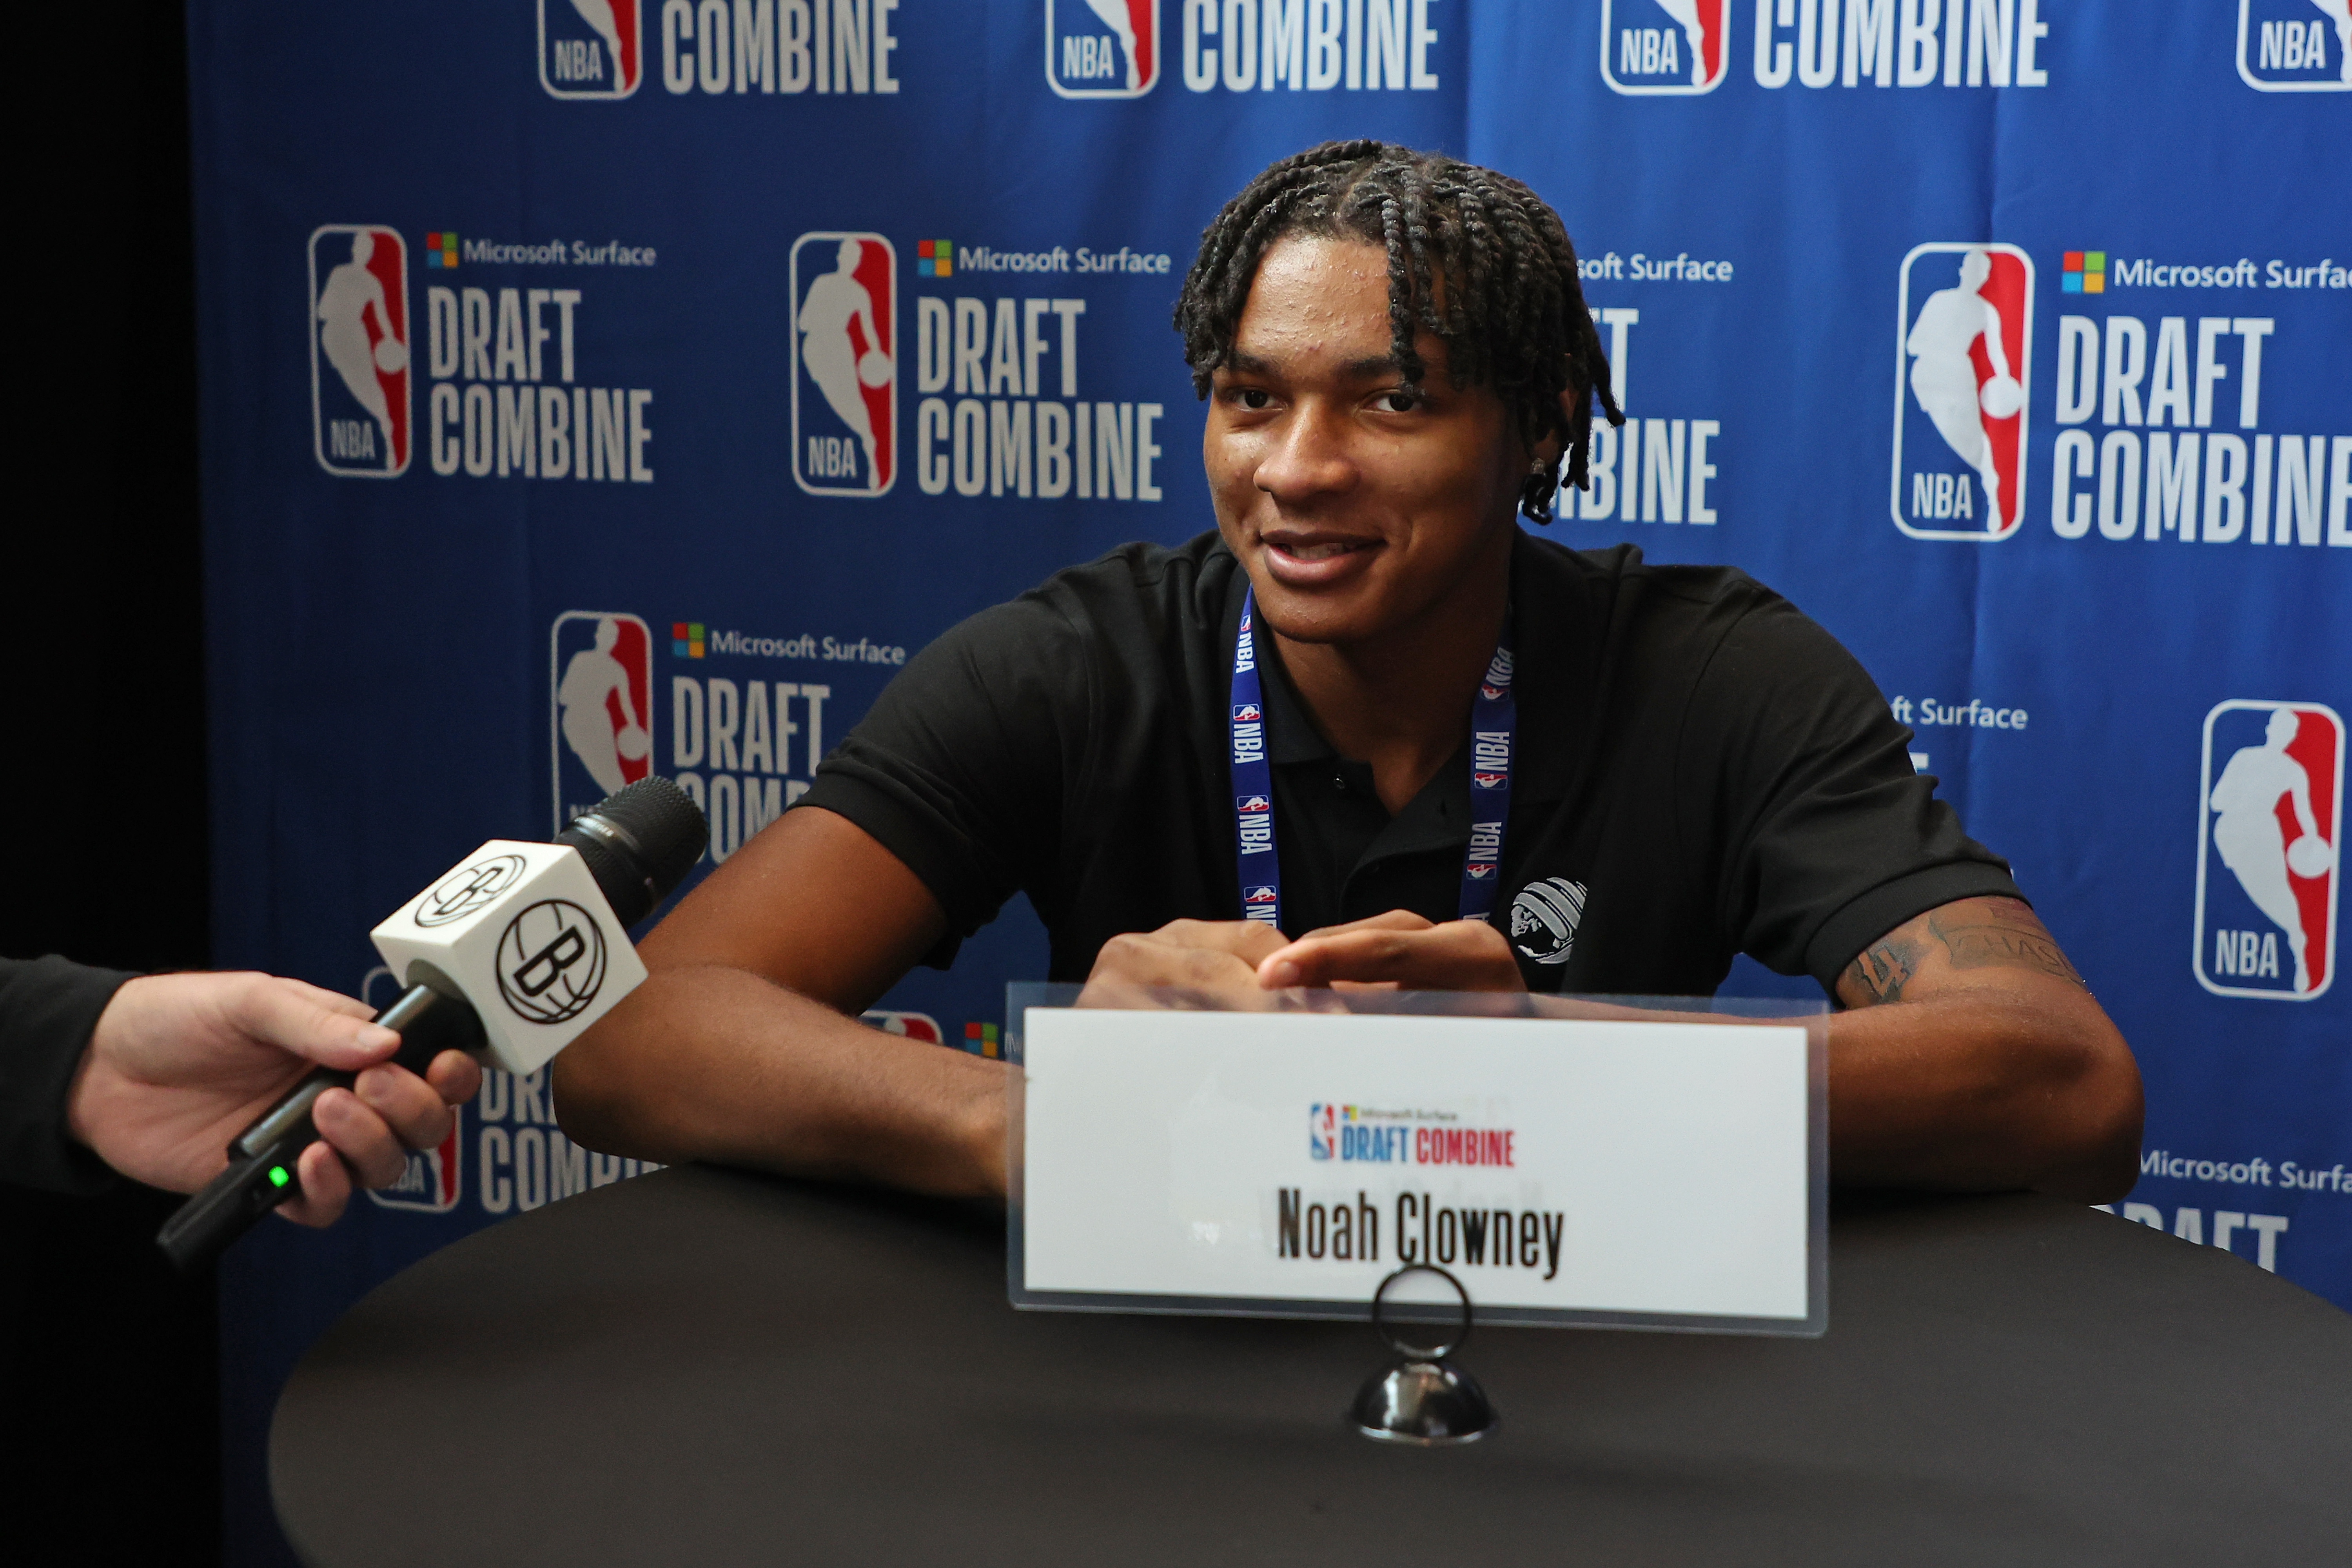 Noah Clowney speaks with the media during the NBA Draft Combine